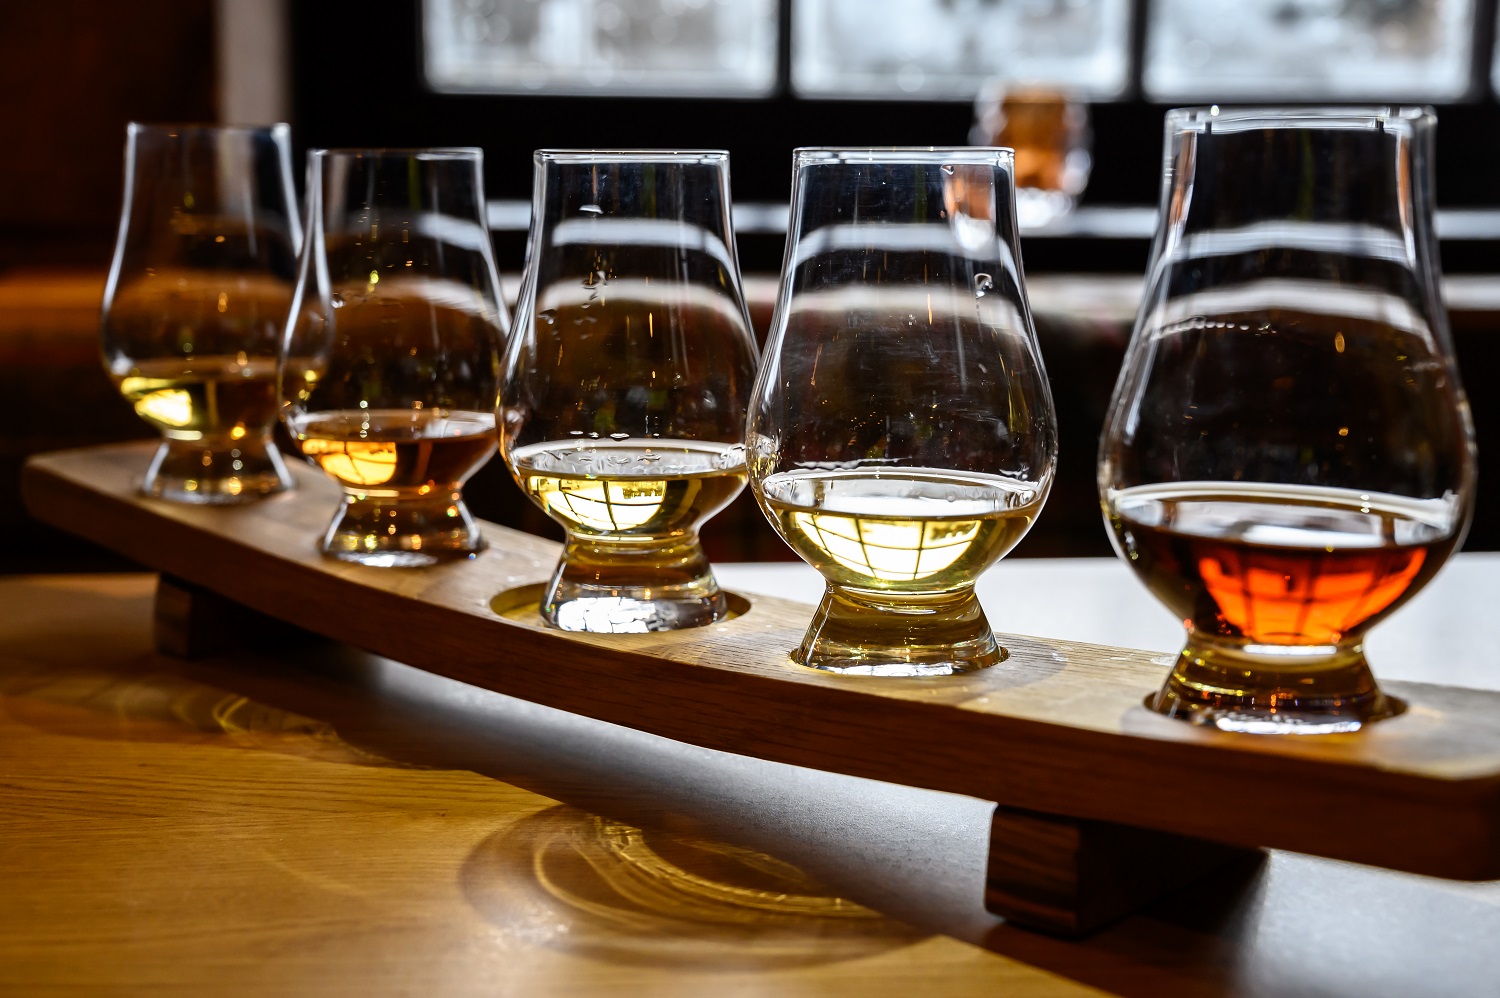 Whiskies get their colour from the cask they are aged in